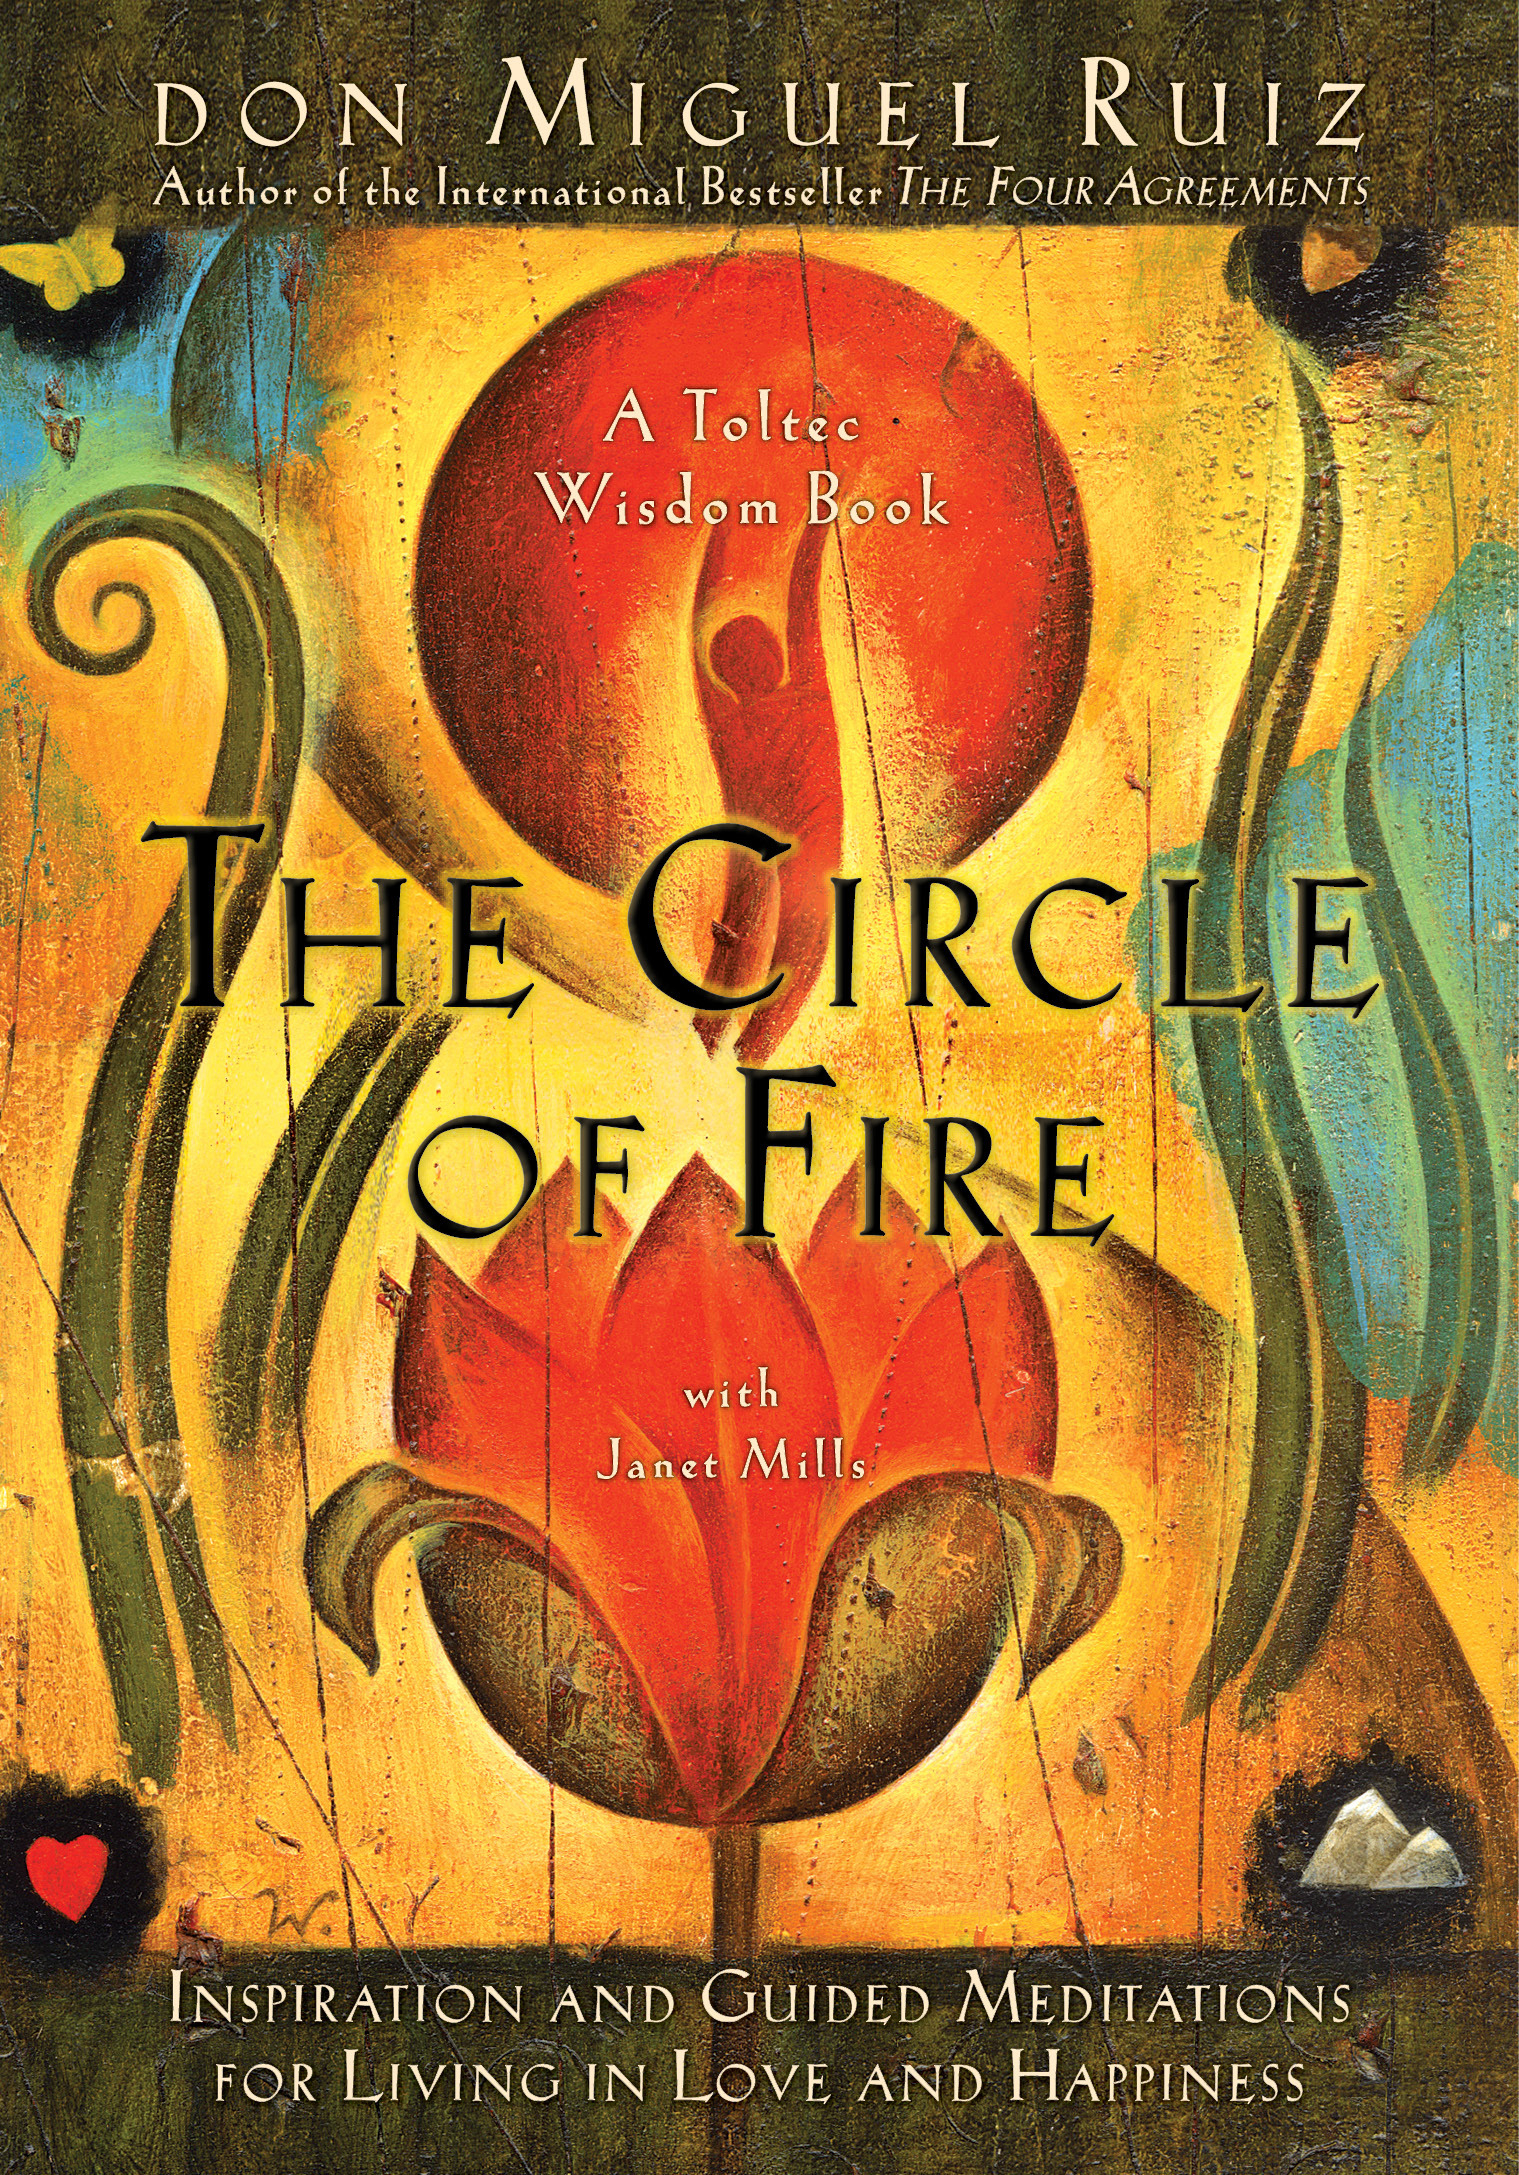 Four Agreements Book Free Download The Circle Of Fire Don Miguel Ruiz Pdf Free Ebooks Download